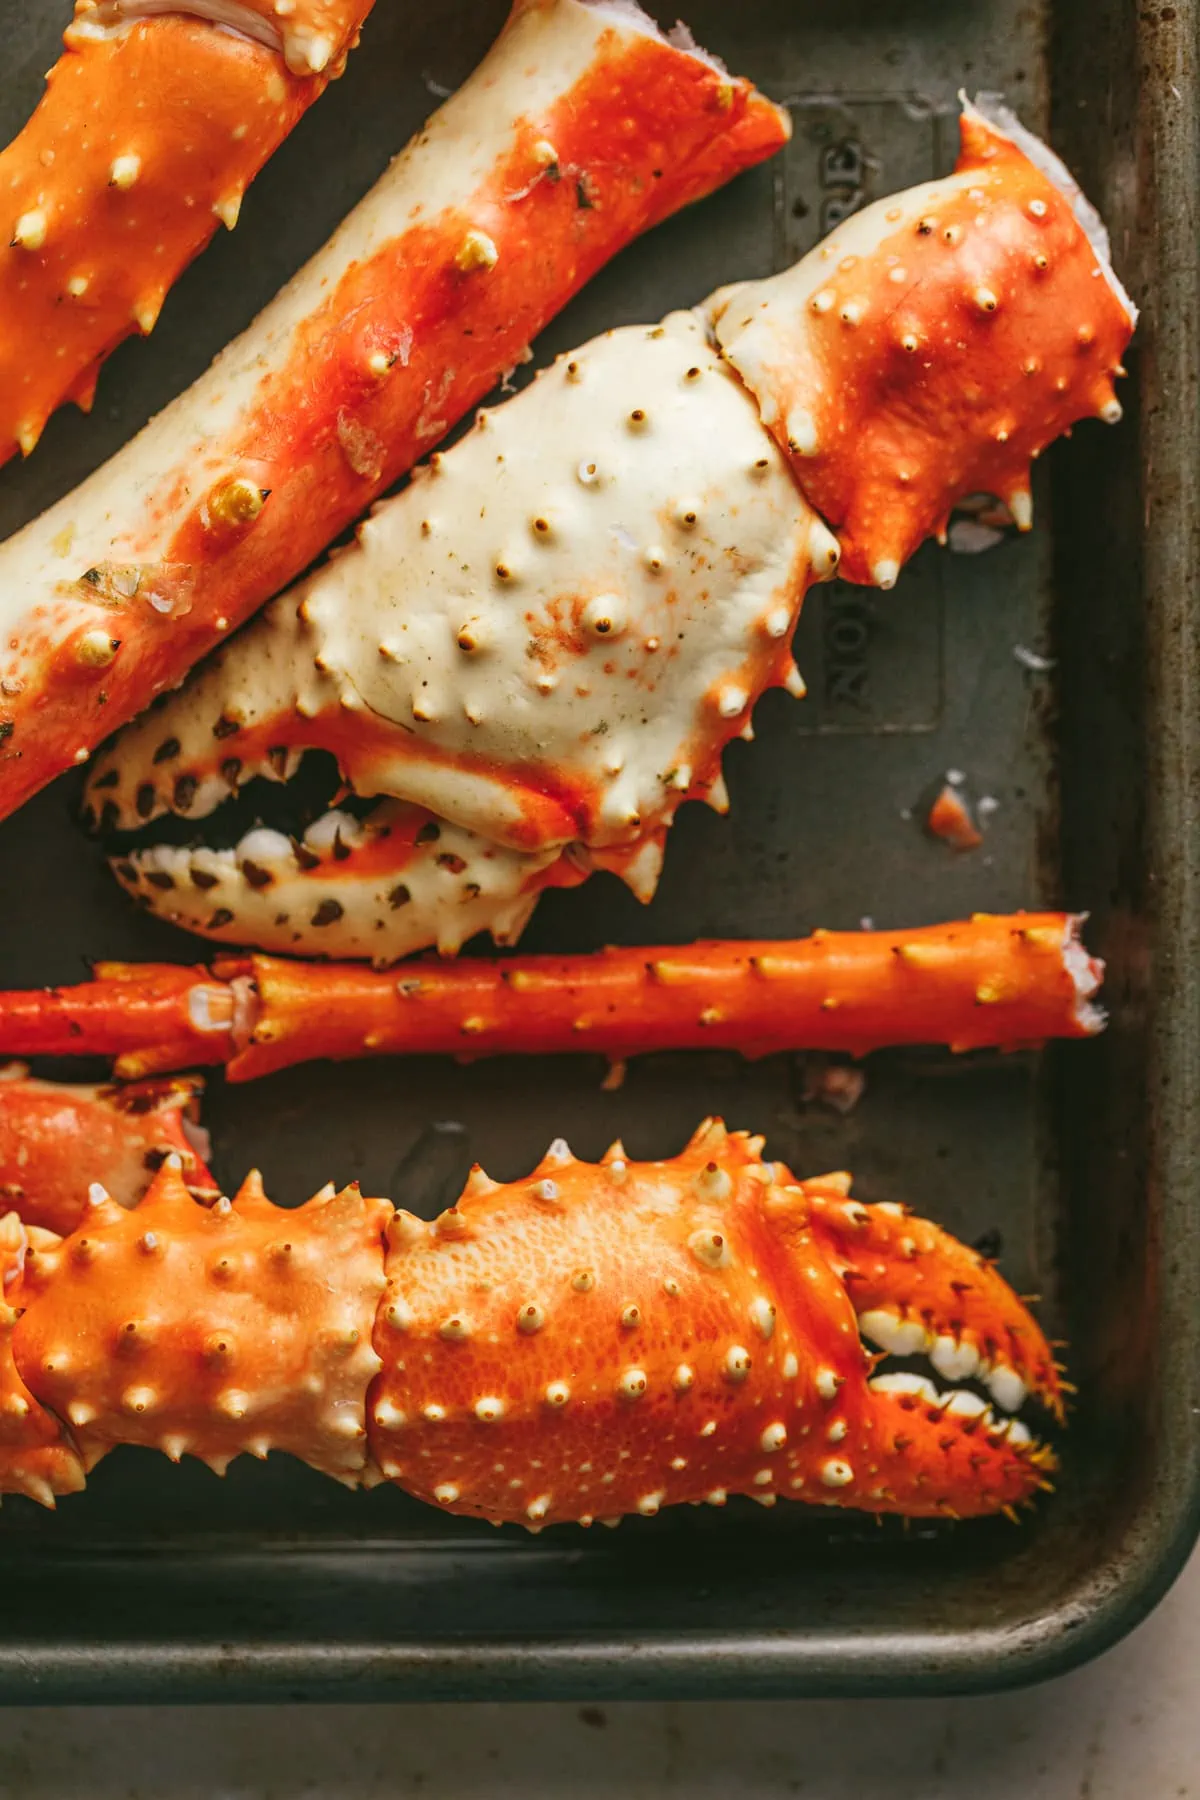 Closeup of king crab legs and claws.